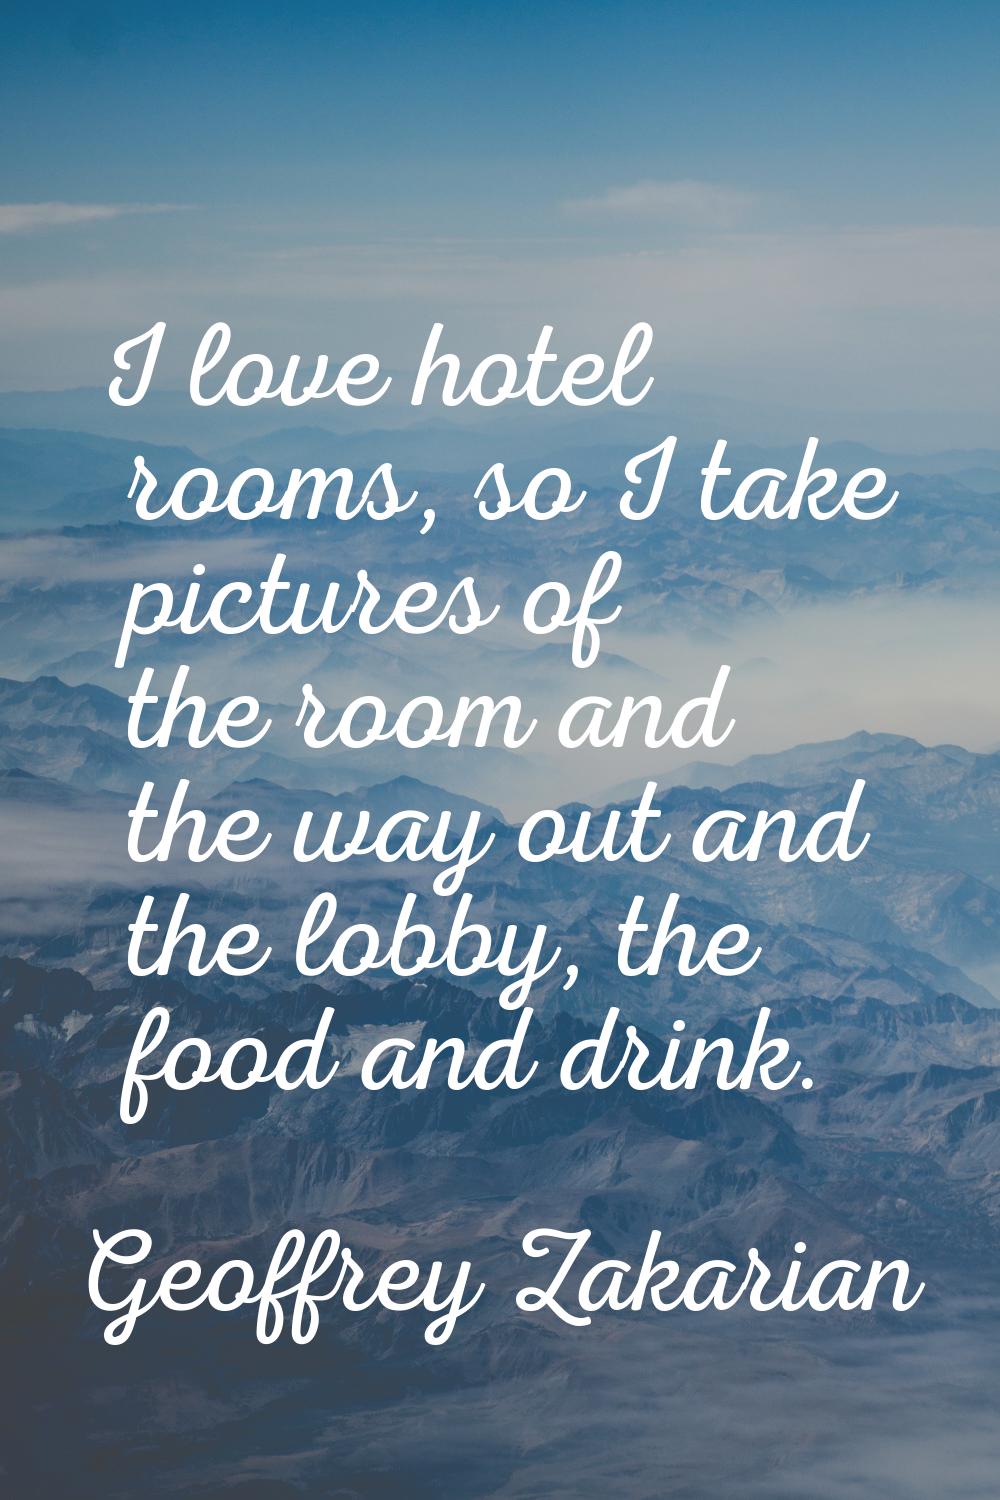 I love hotel rooms, so I take pictures of the room and the way out and the lobby, the food and drin